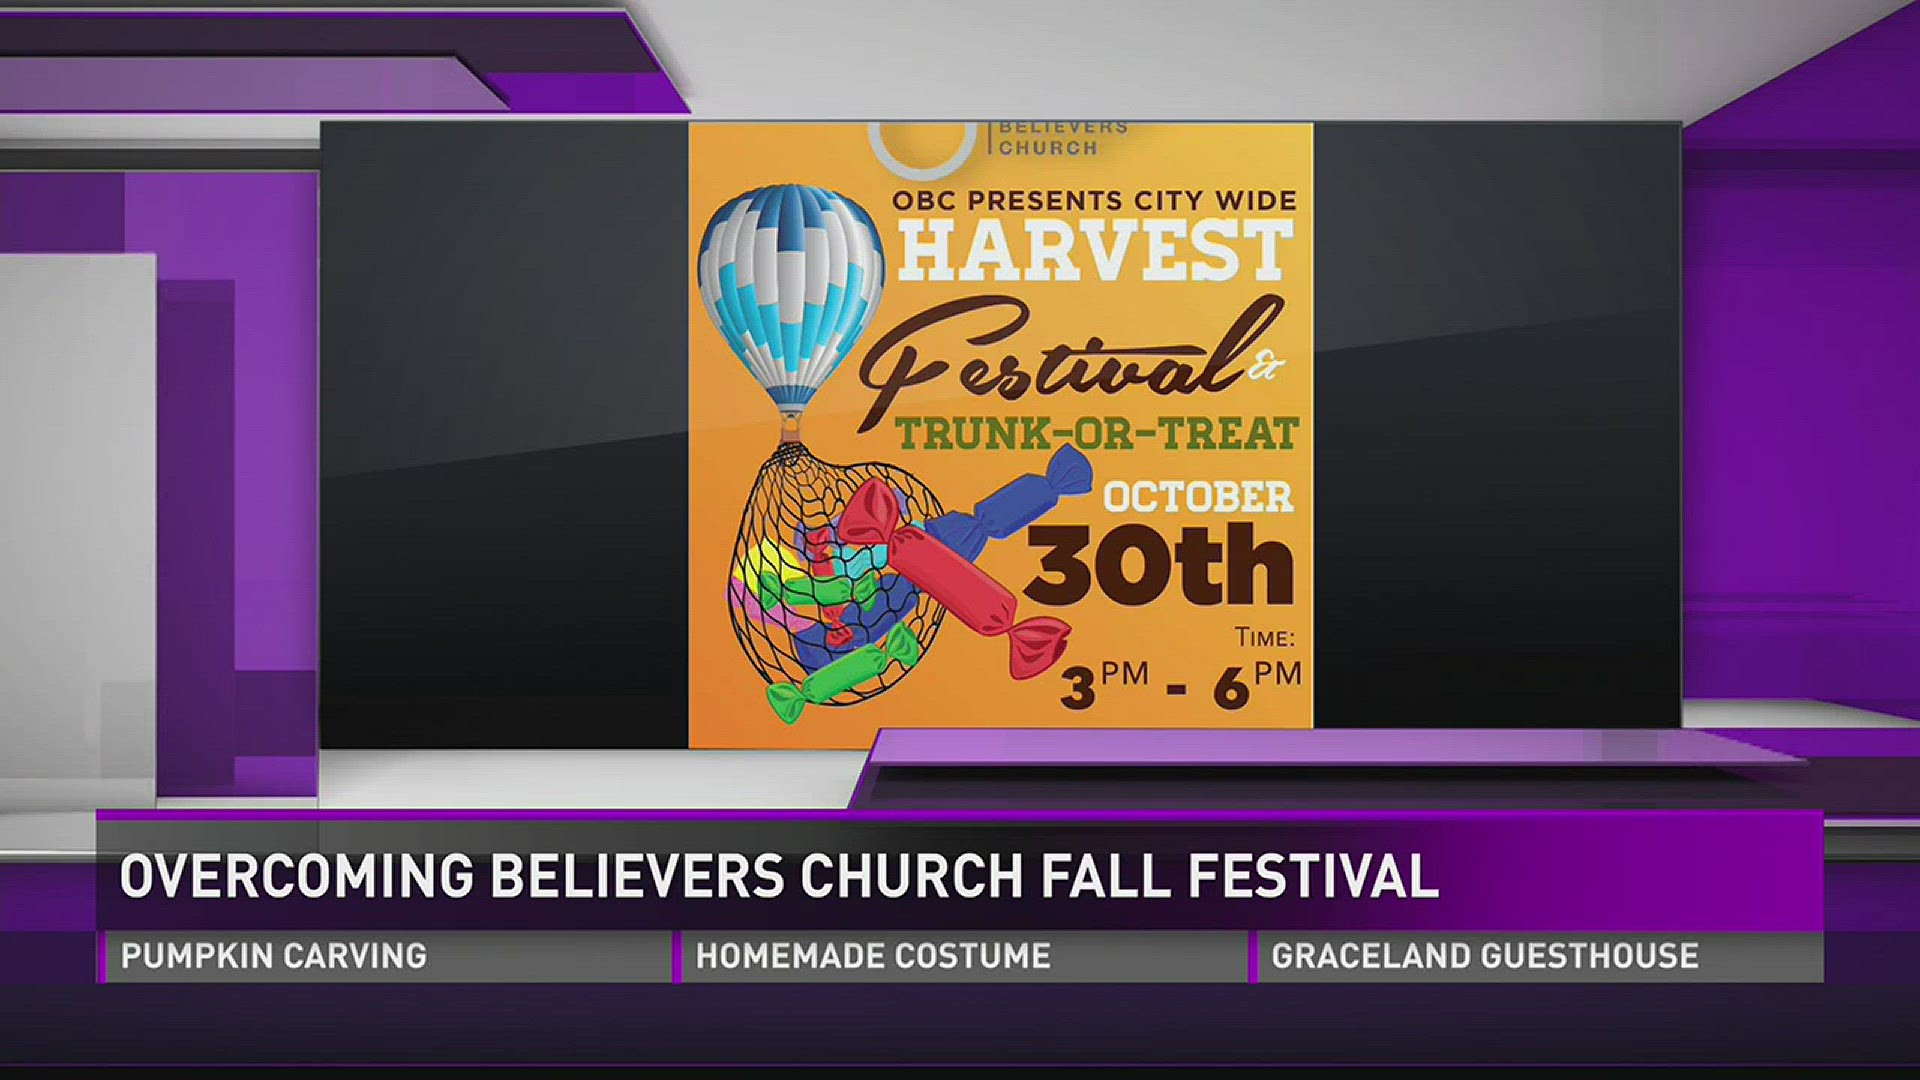 Overcoming Believers Church has its Trunk-Or-Treat event on Oct. 30 from 3-6 p.m.